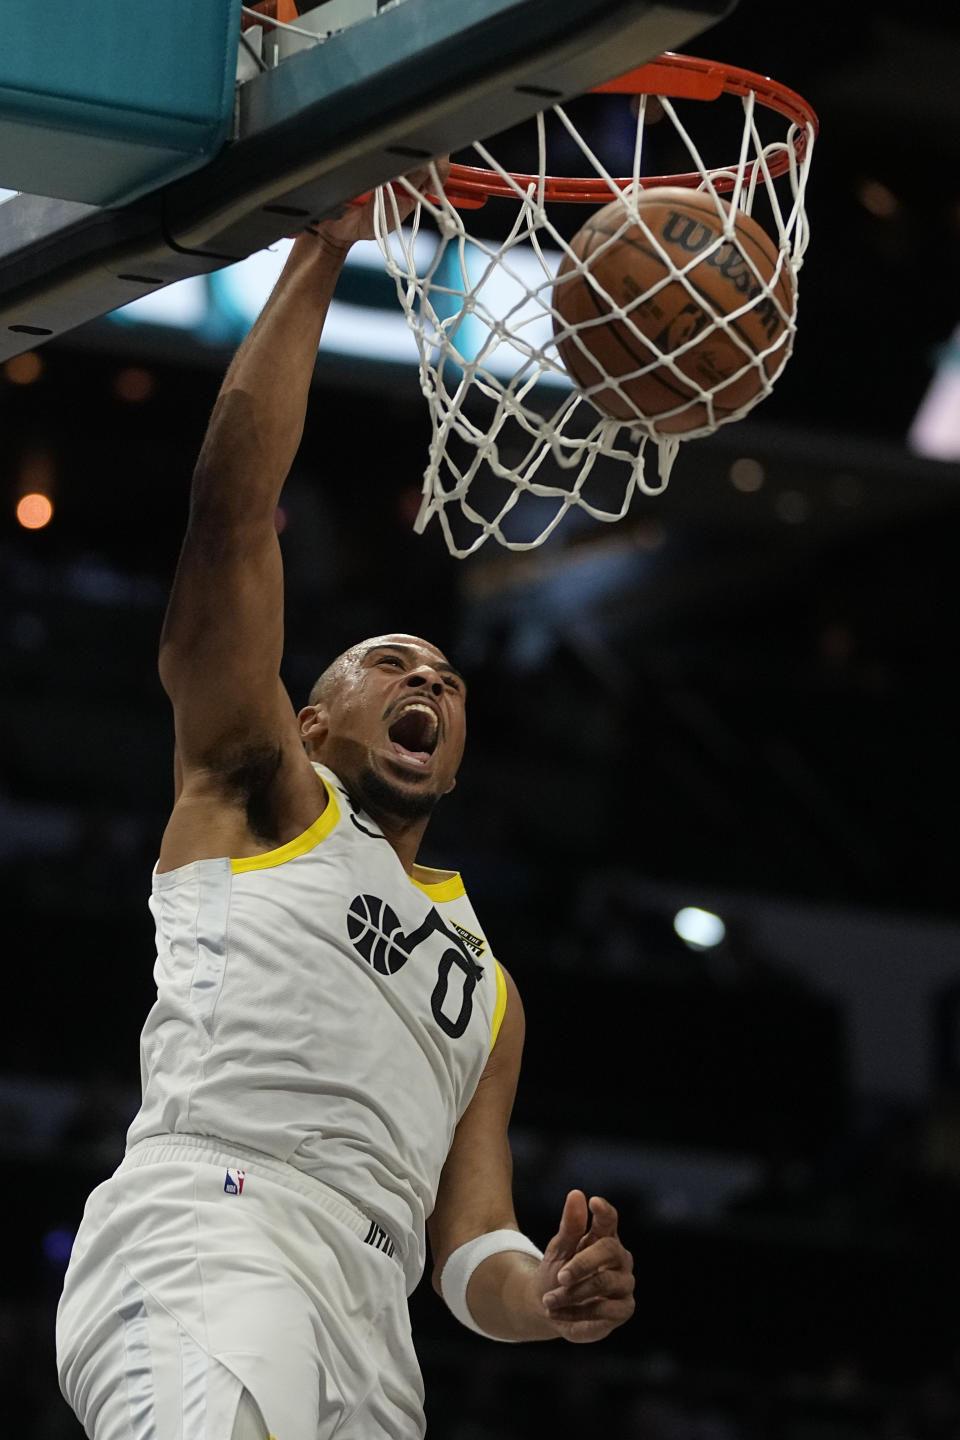 Utah Jazz guard Talen Horton-Tucker dunks against the Charlotte Hornets during the first half of an NBA basketball game on Saturday, March 11, 2023, in Charlotte, N.C. (AP Photo/Chris Carlson)